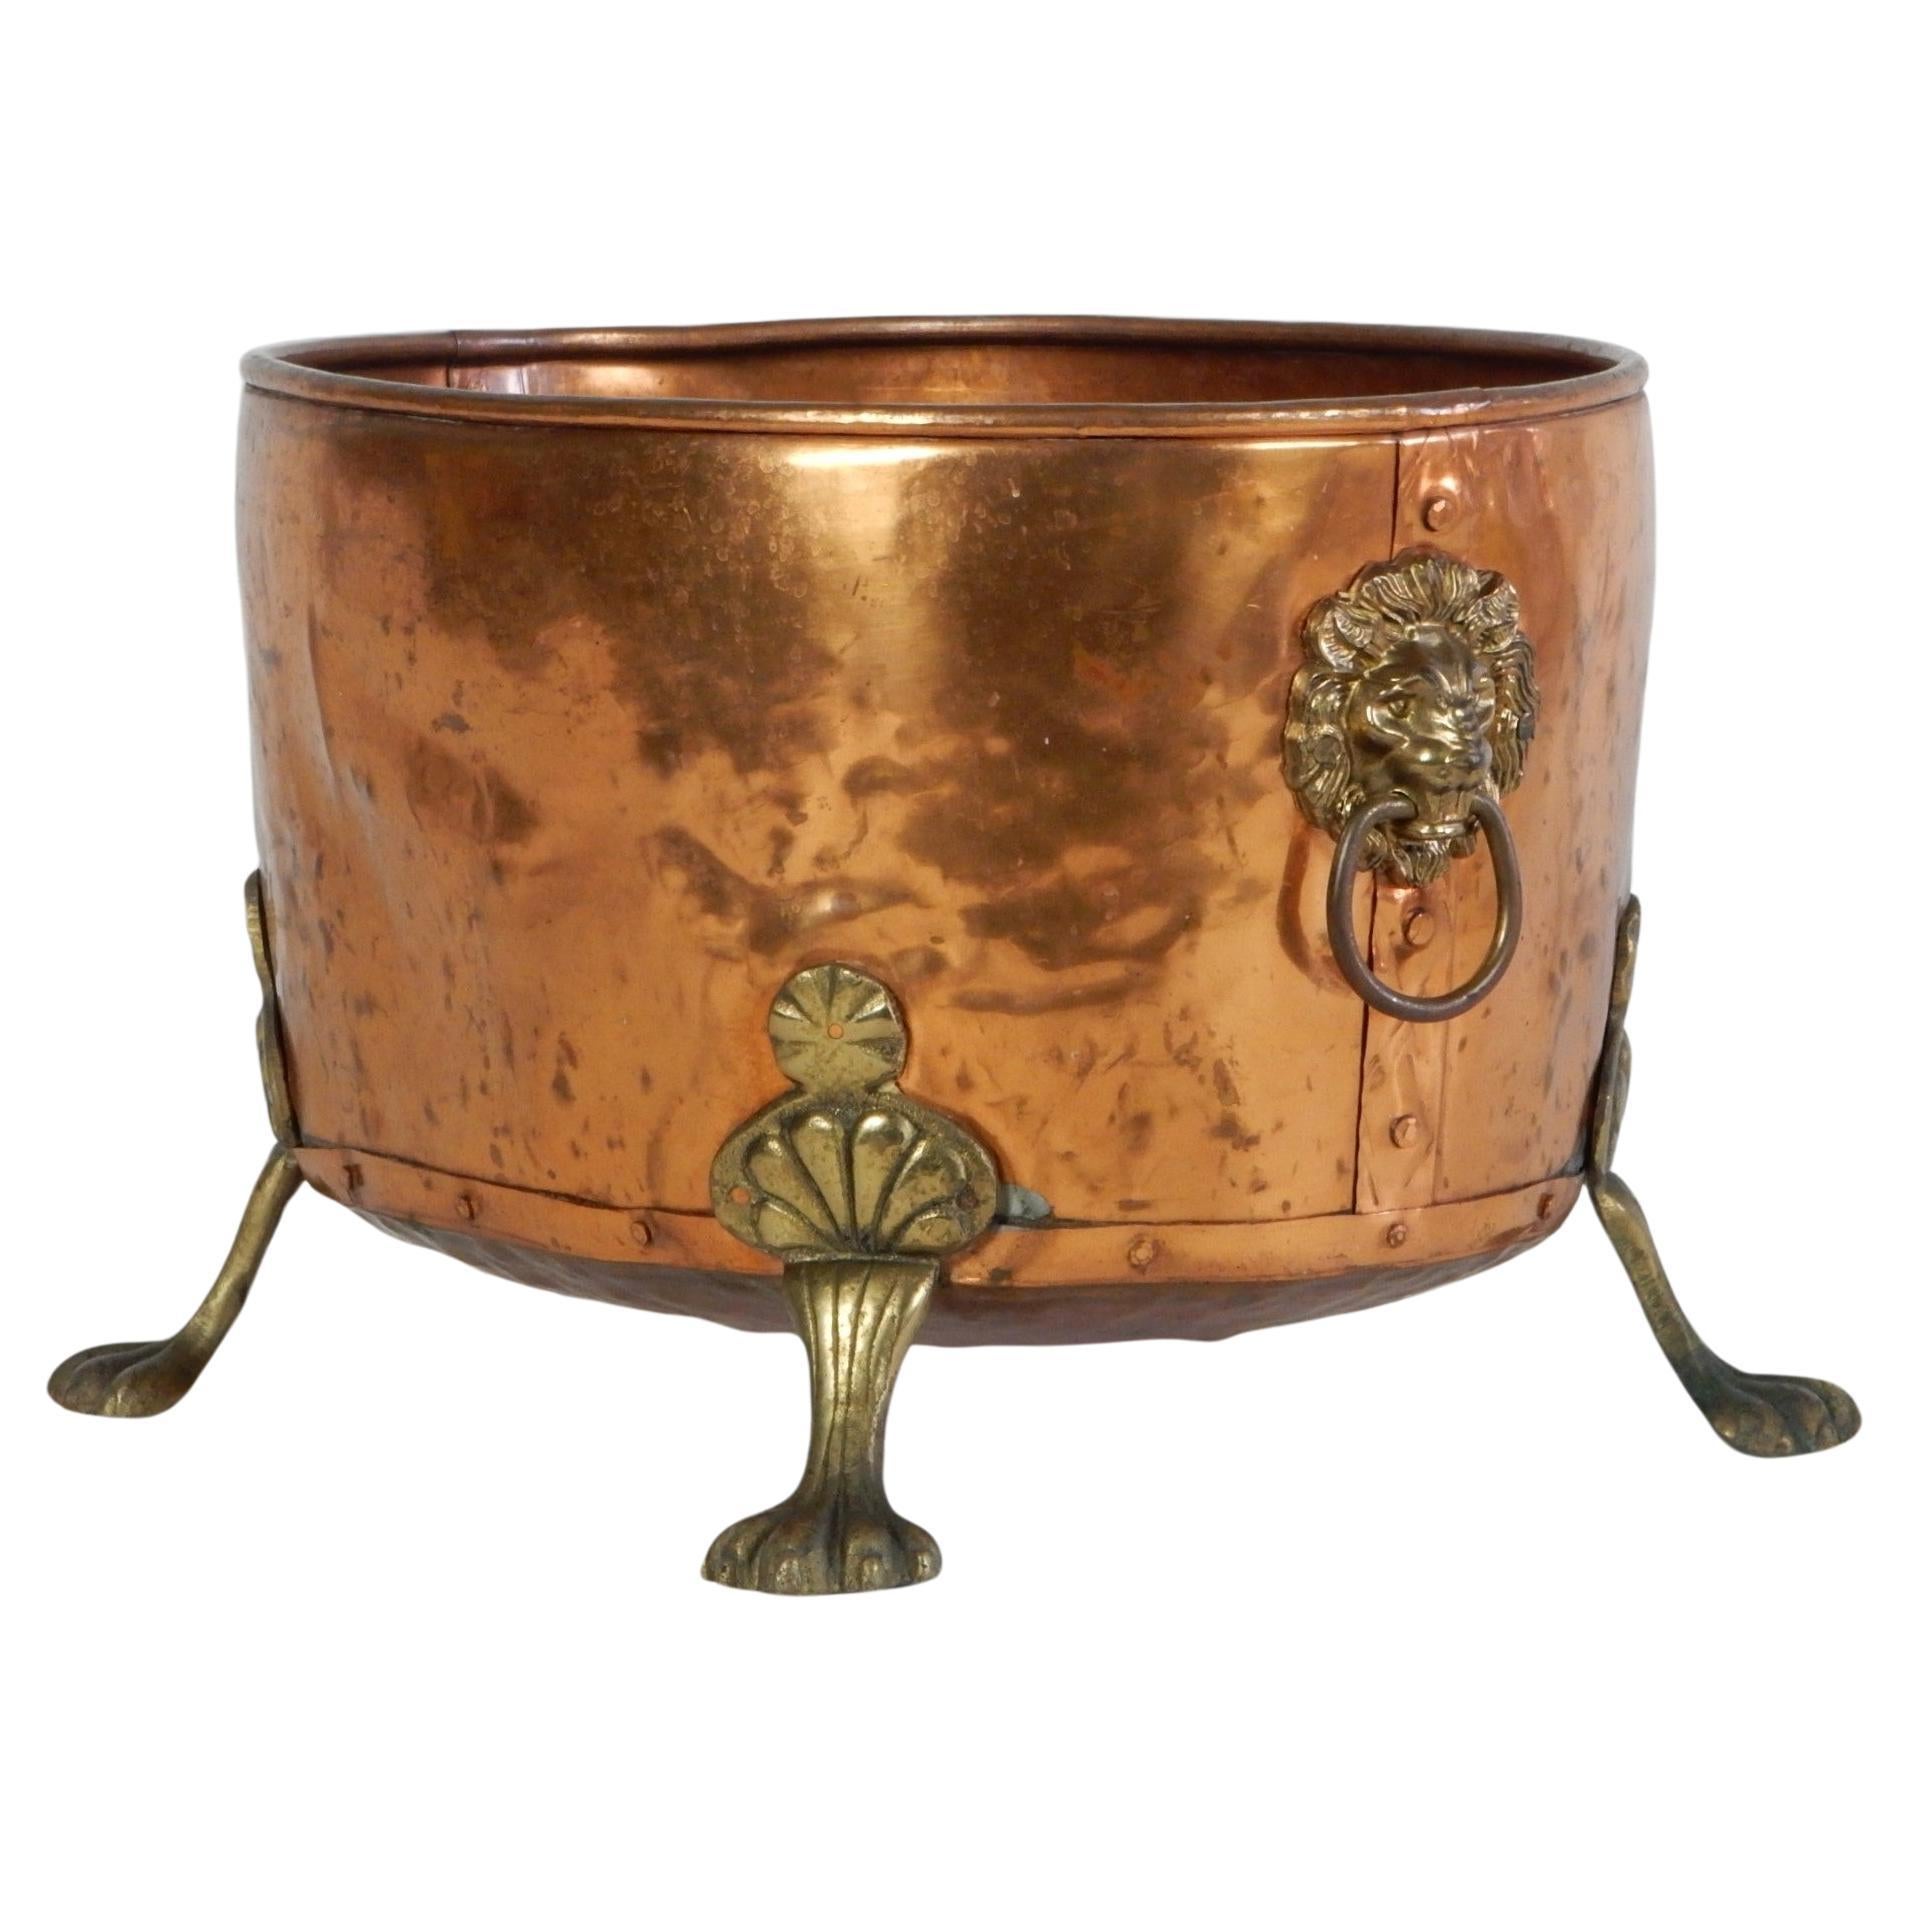 19th Century English Hammered Copper & Brass Claw Footed Lion Log Bin Planter For Sale 4